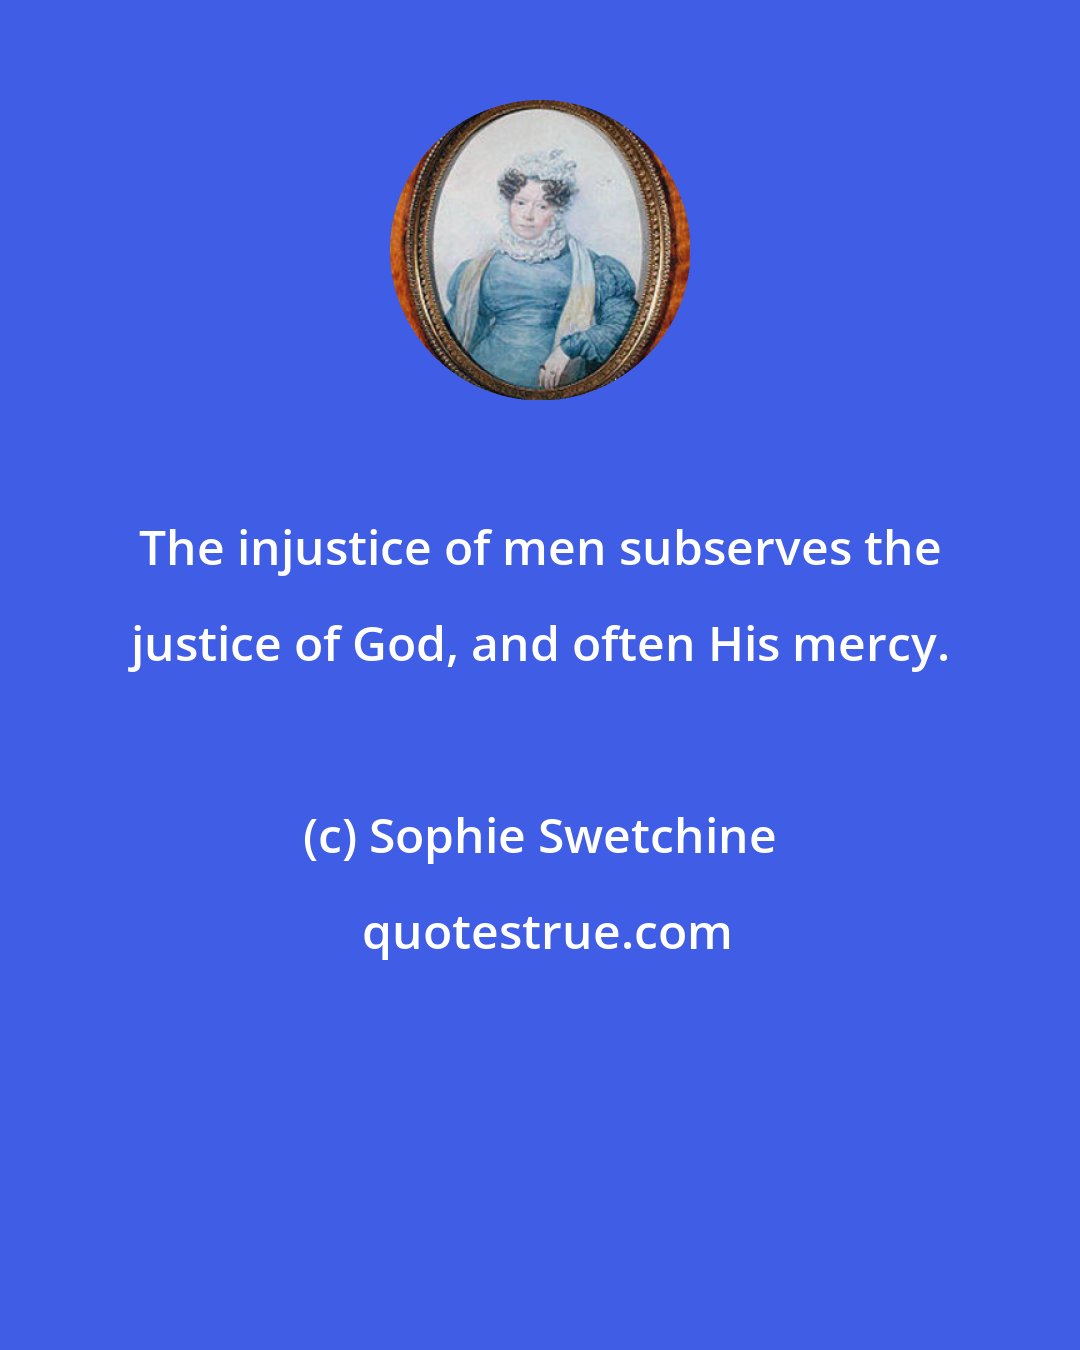 Sophie Swetchine: The injustice of men subserves the justice of God, and often His mercy.